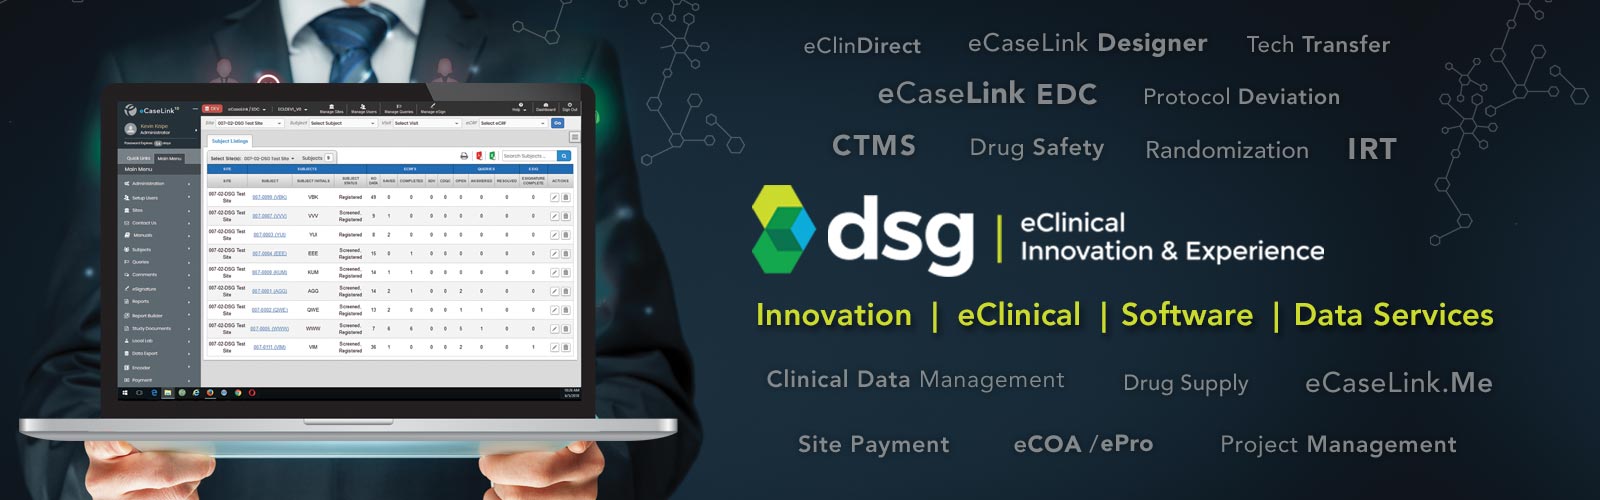 Enhancing the EDC experience with eCaseLink 10 from DSG